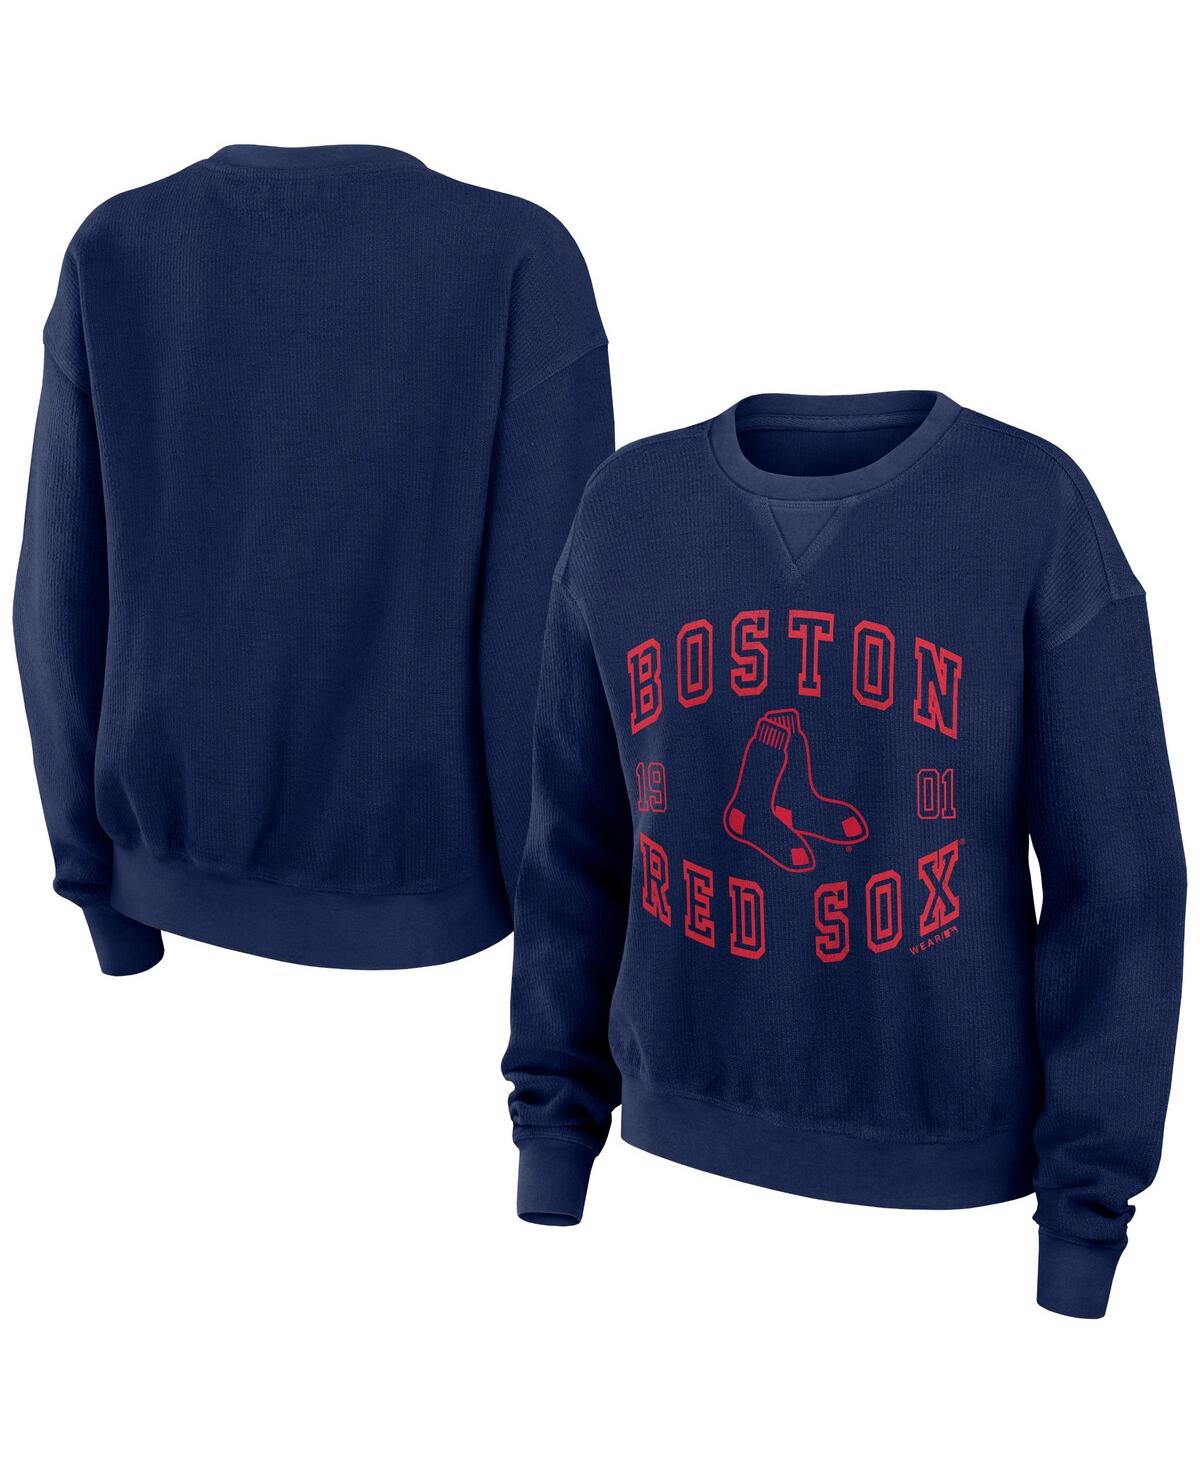 Shop Wear By Erin Andrews Women's  Navy Distressed Boston Red Sox Vintage-like Cord Pullover Sweatshirt